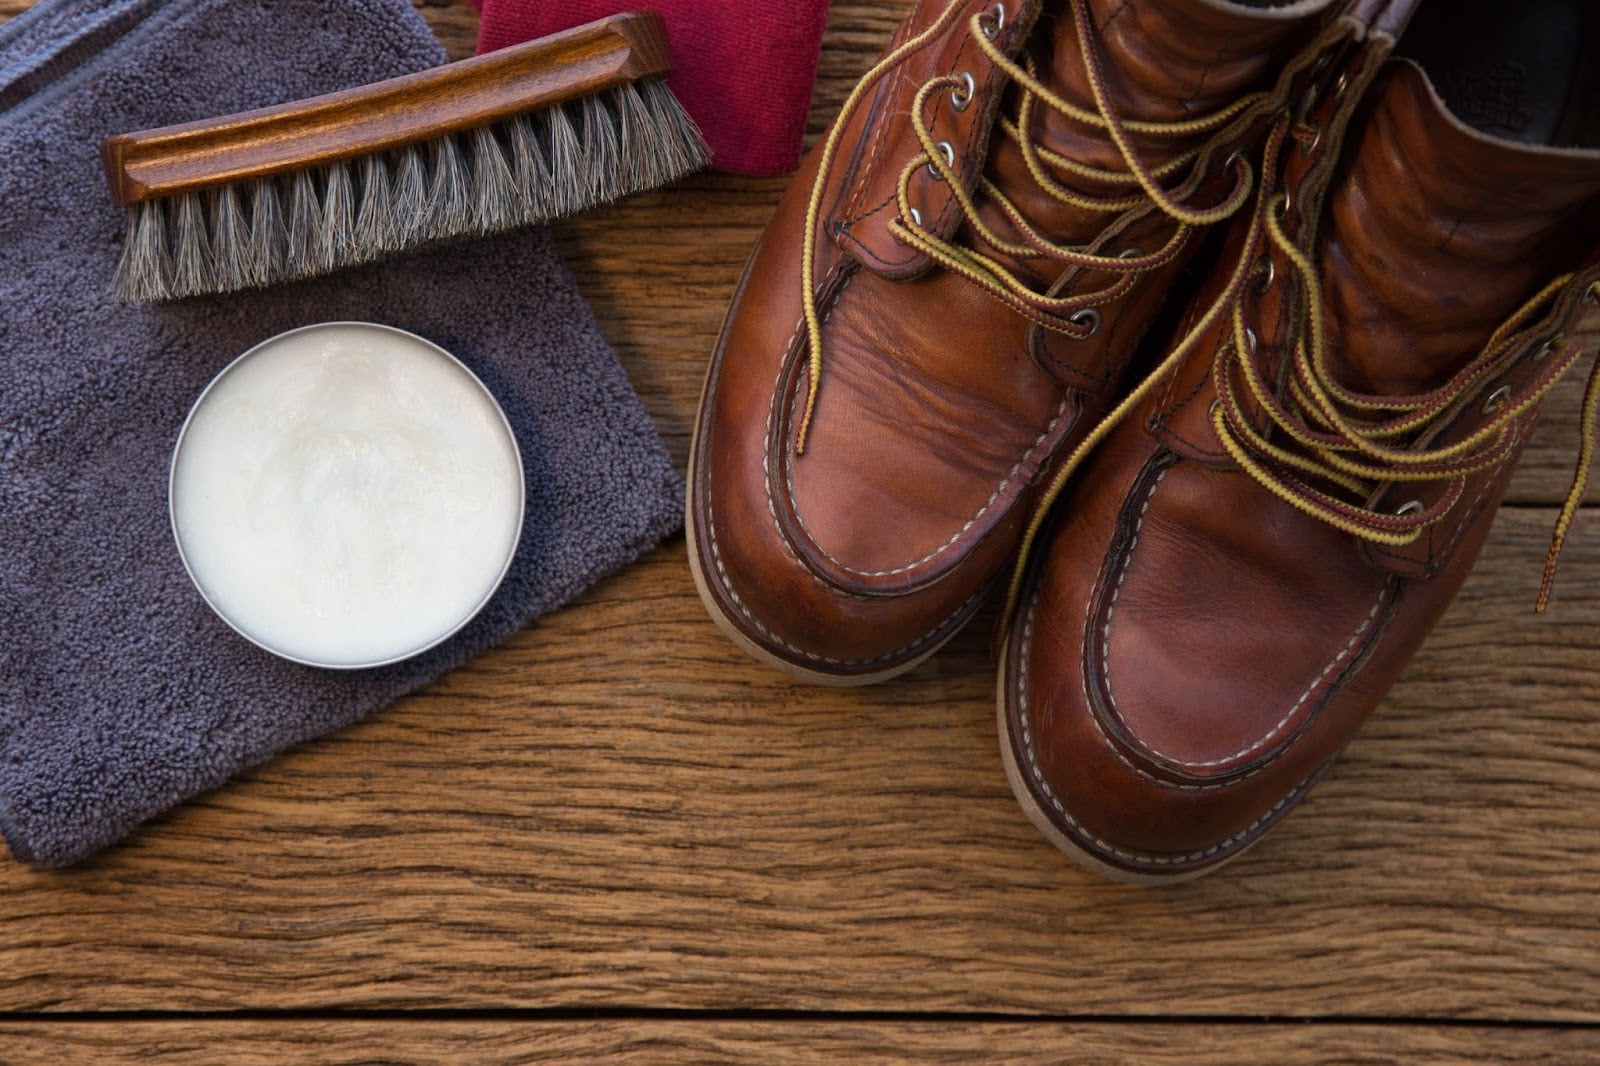 Clean Leather Boots with brush and cloth on wood floor.